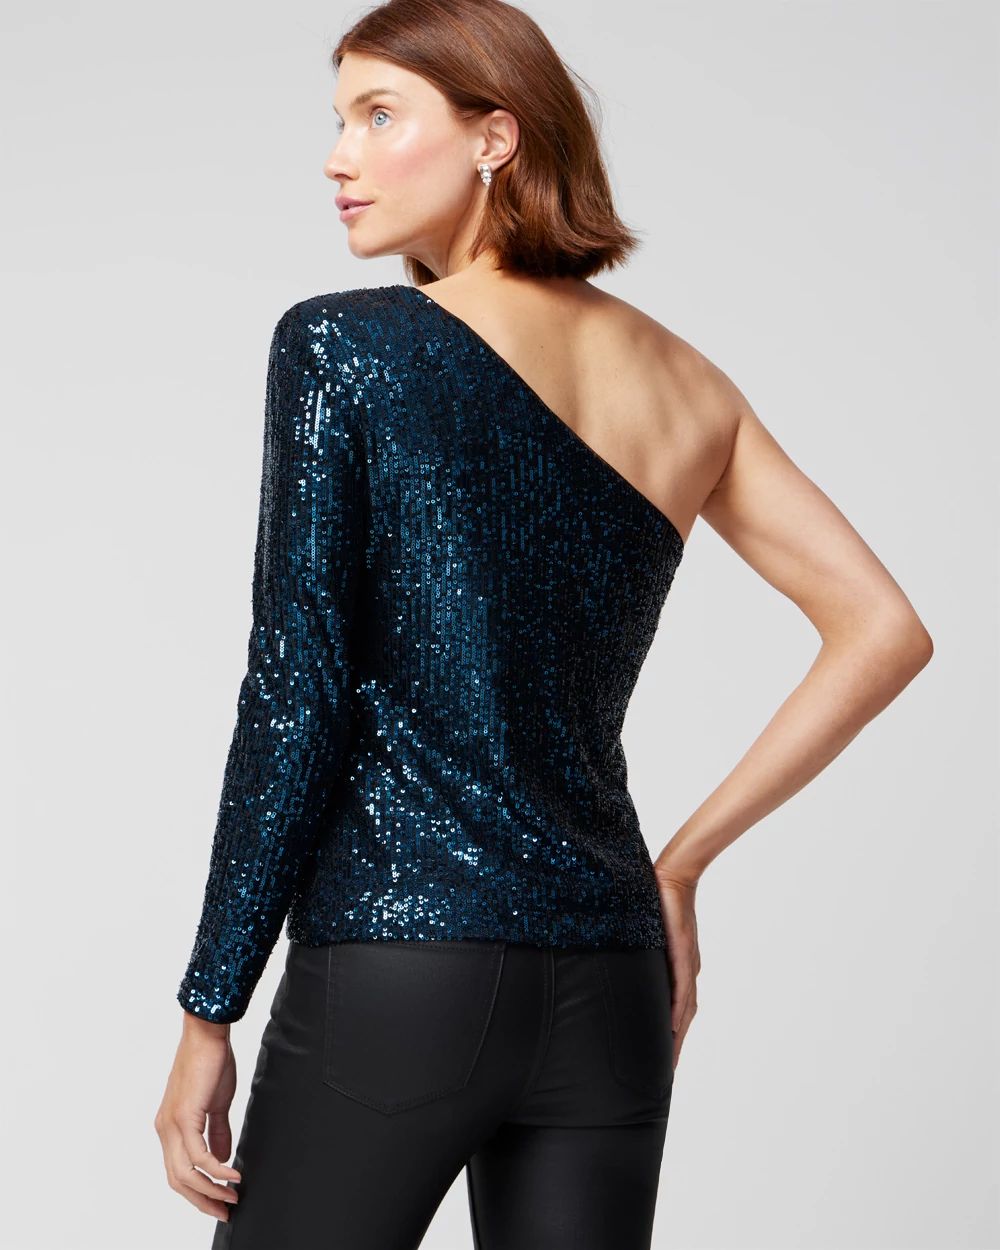 Sequin One Shoulder Top click to view larger image.